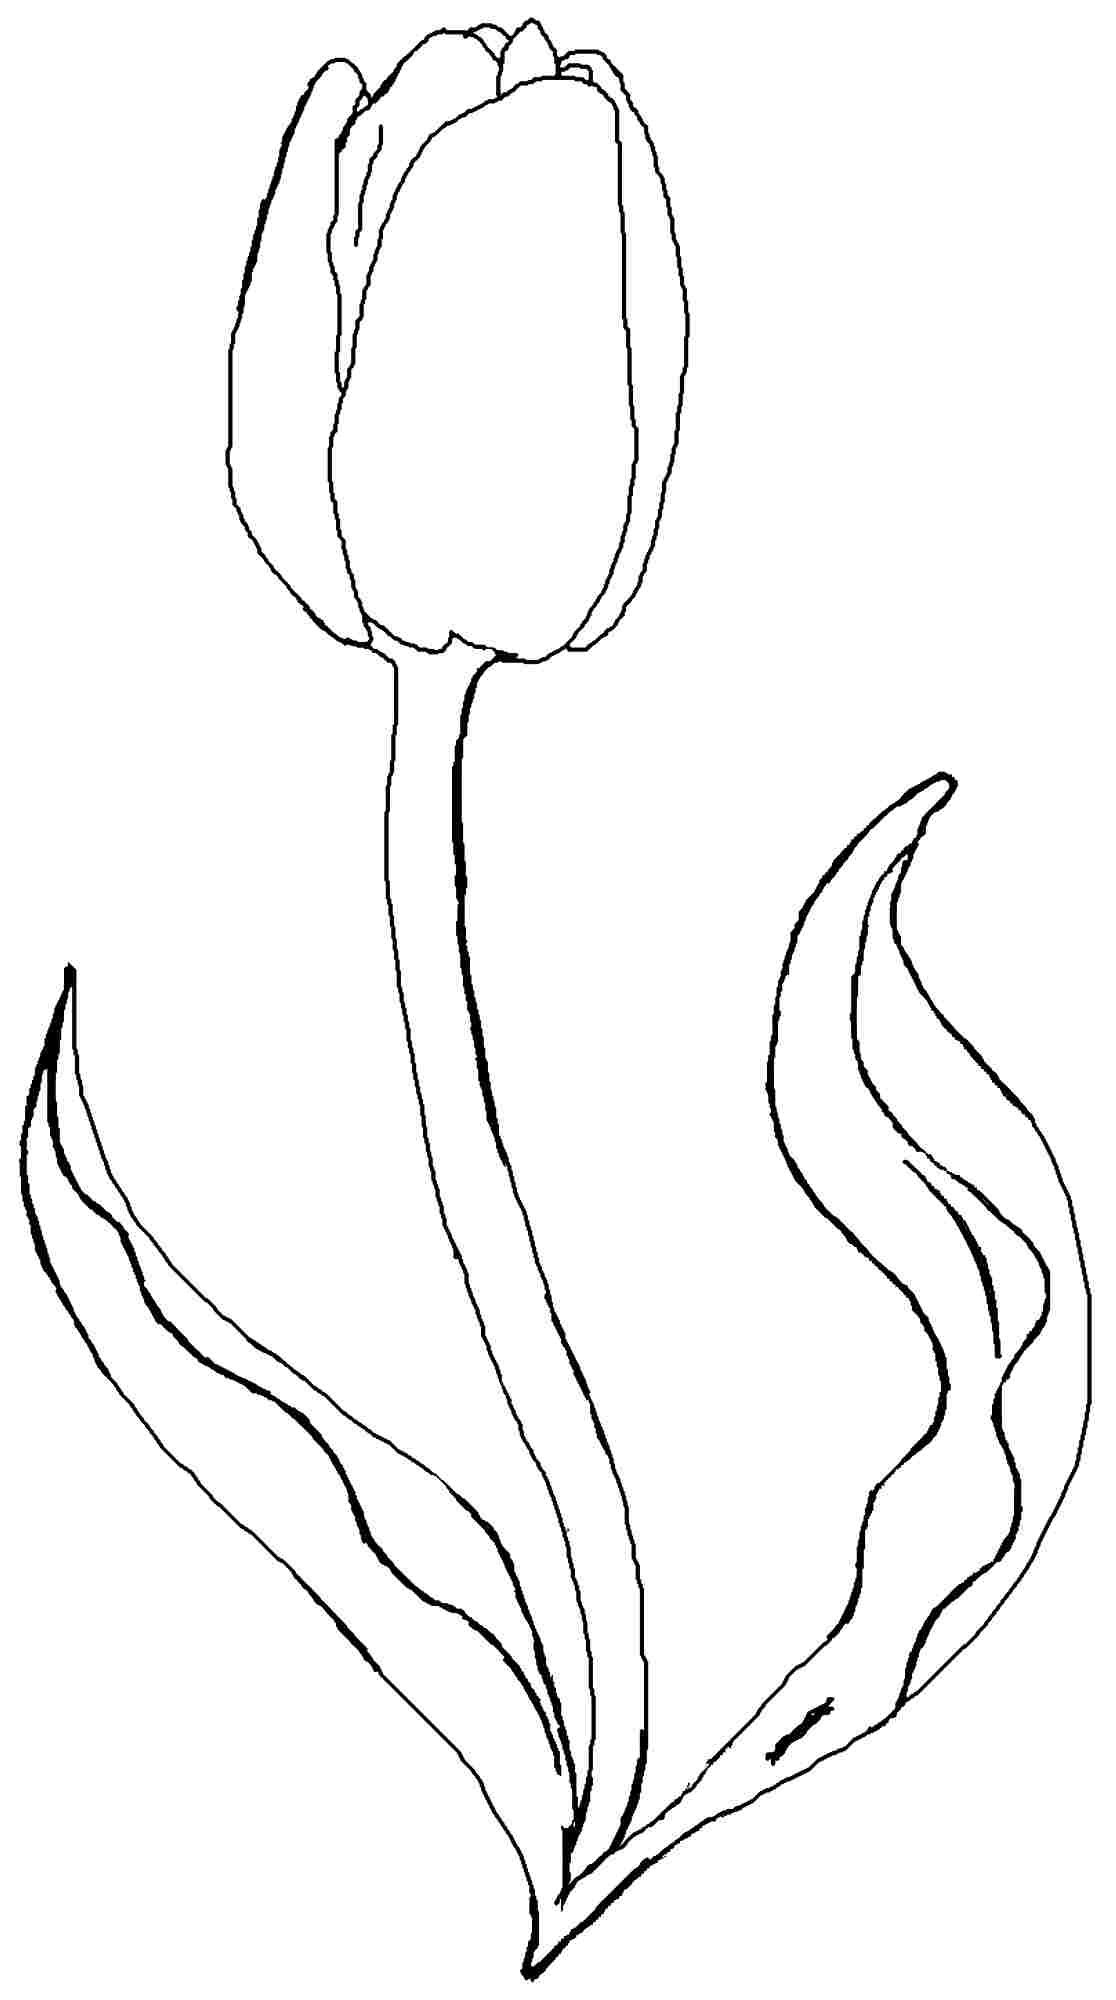 Tulip Flower Coloring Pages Free Printable Tulip Coloring | Sketch - Free Printable Tulip Coloring Pages